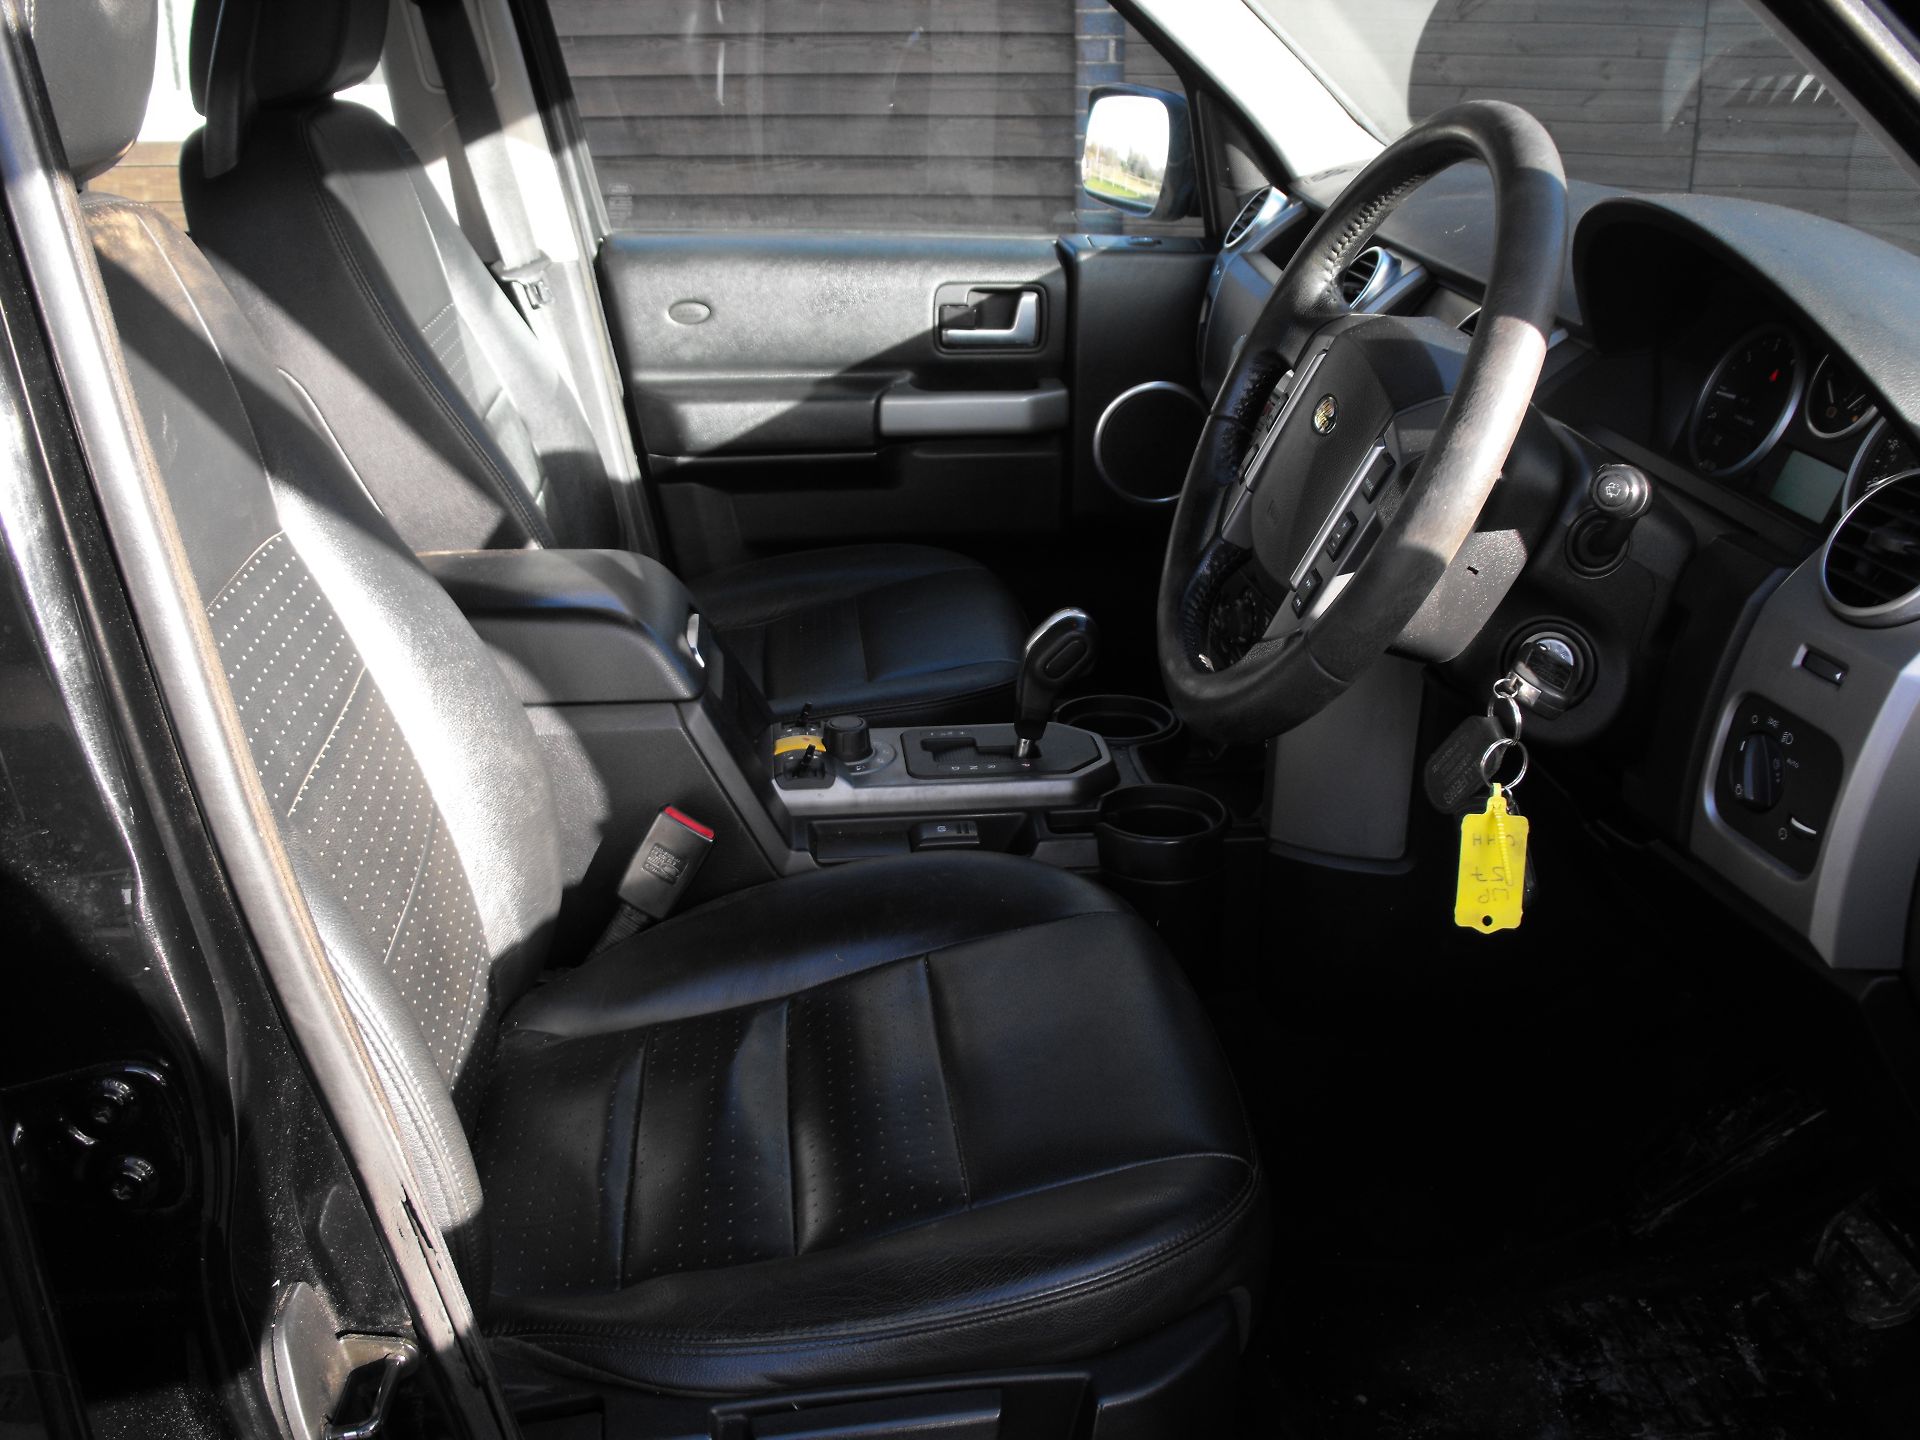 Land Rover Discovery 3 XS TDV6 Auto 2008 - Image 5 of 9